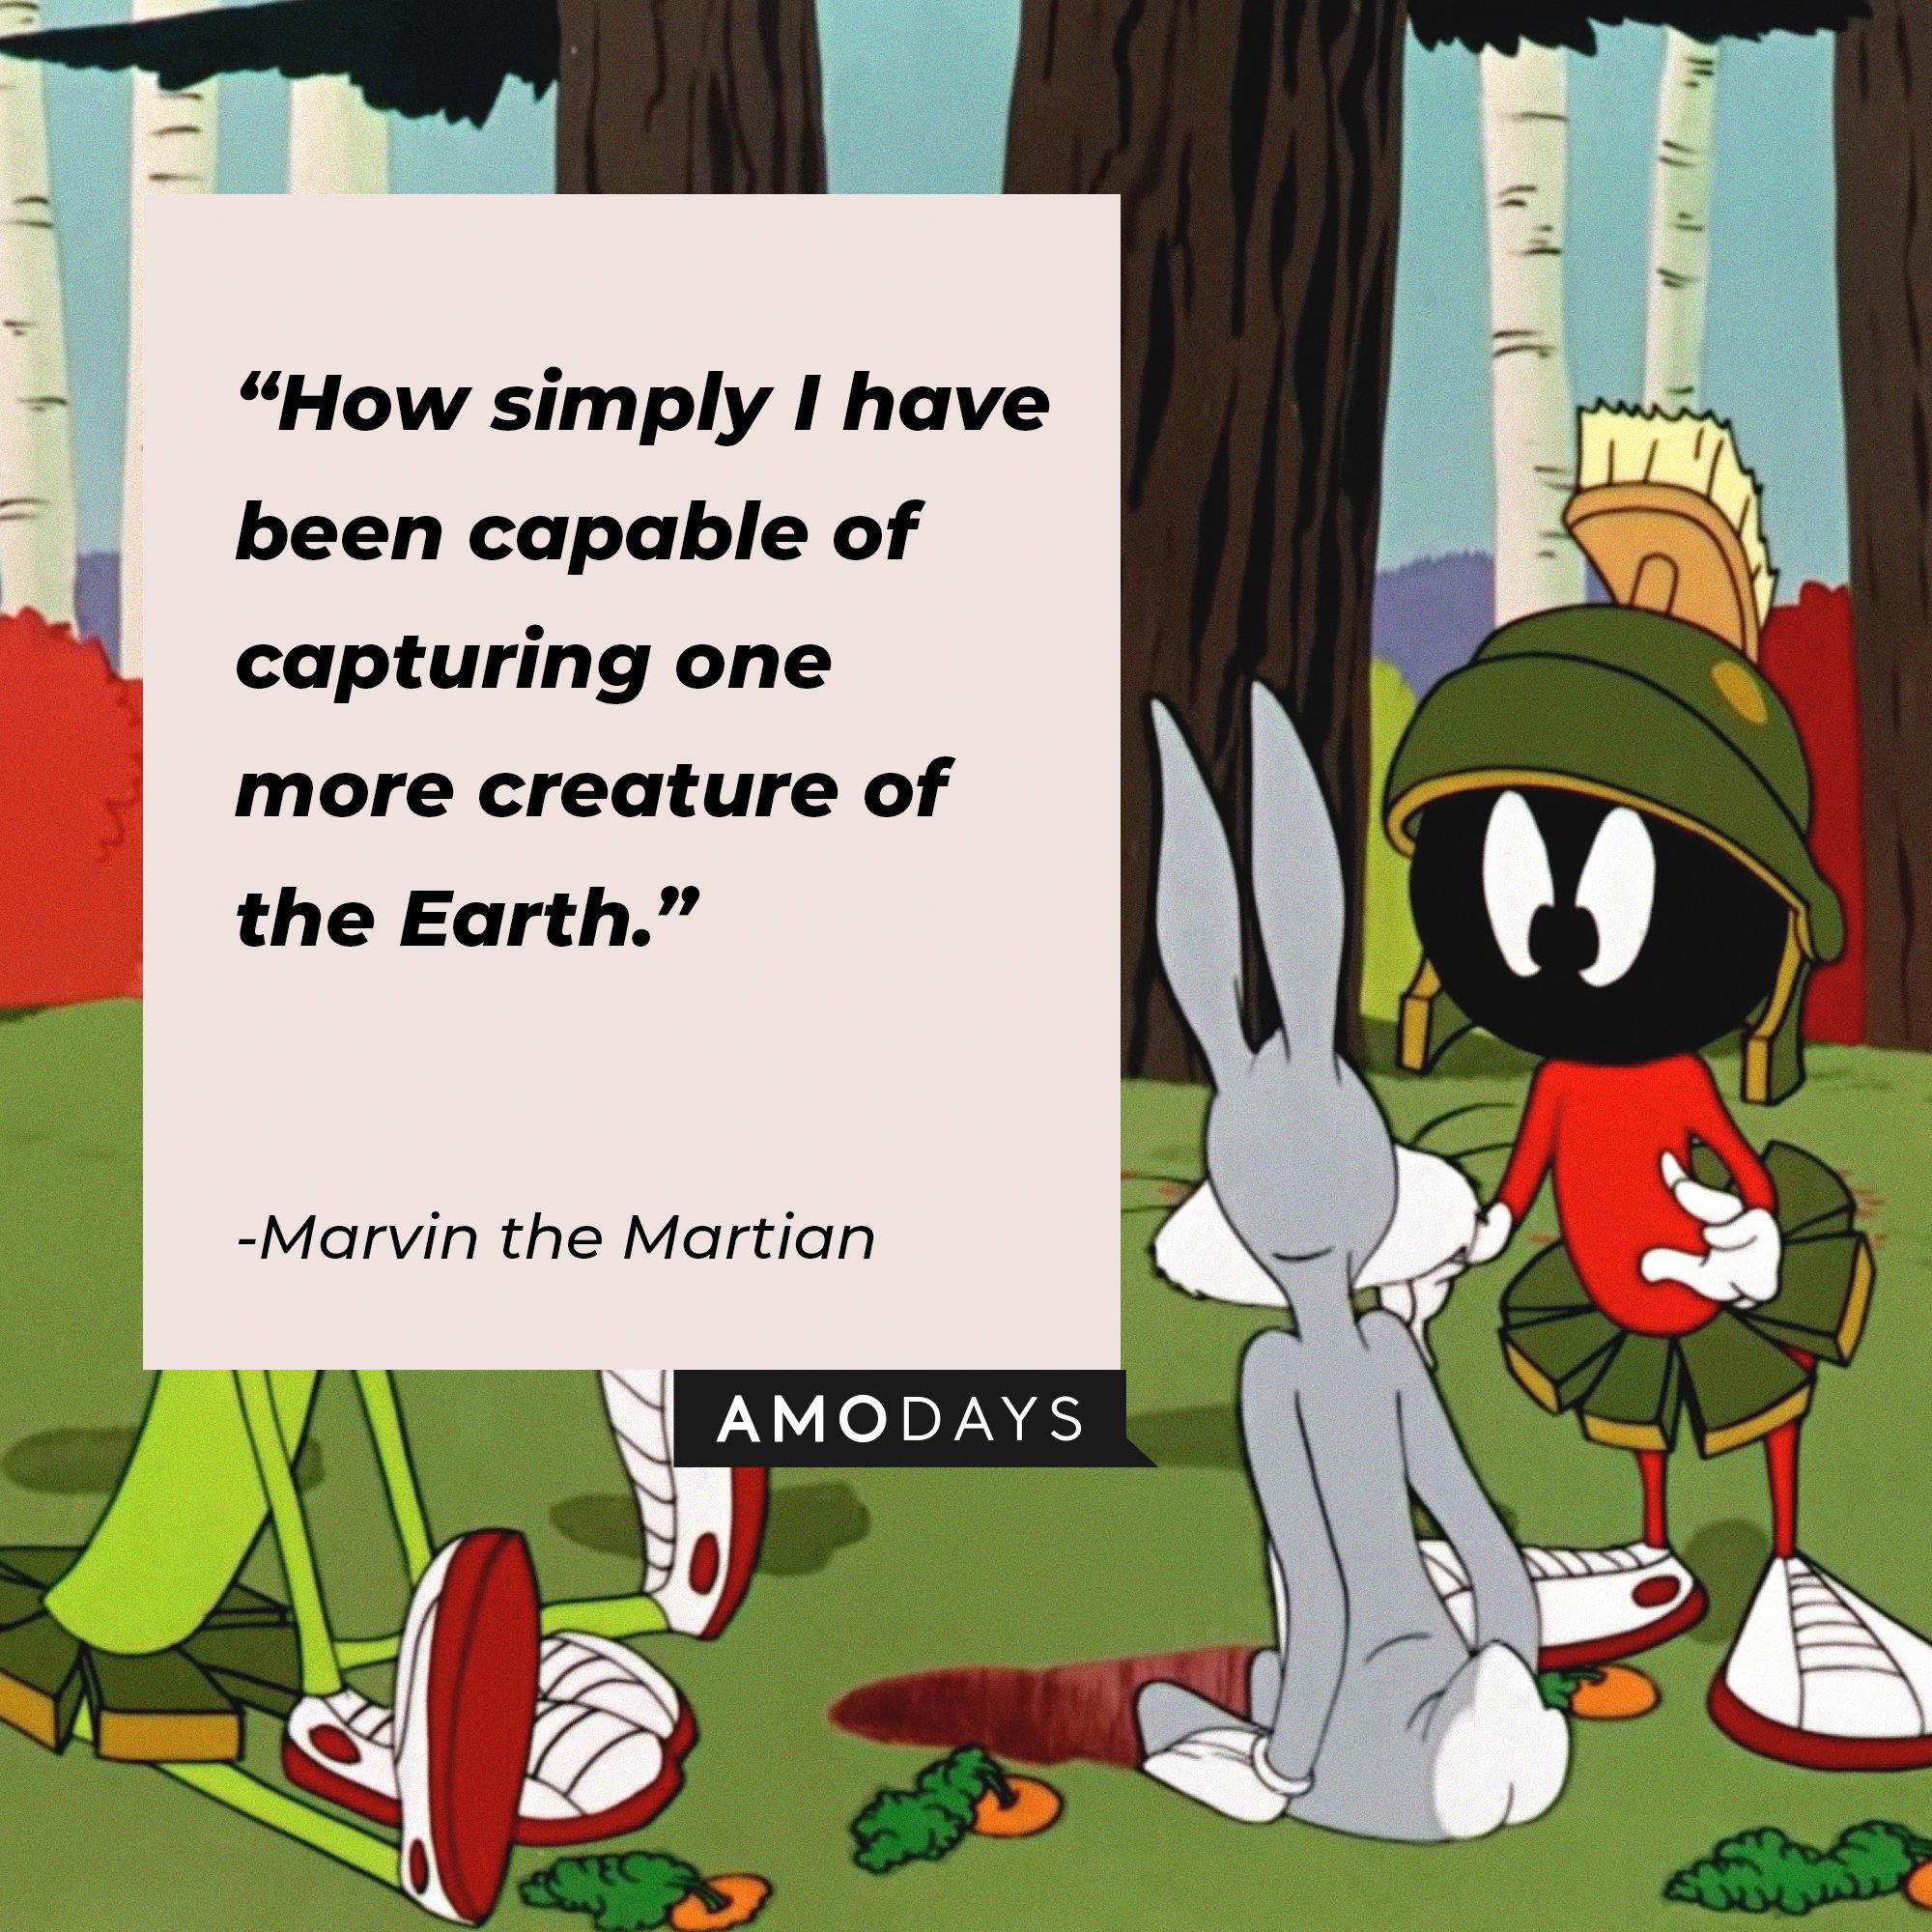 Marvin the Martian’s quote: "How simply I have been capable of capturing one more creature of the Earth." | Image: AmoDays